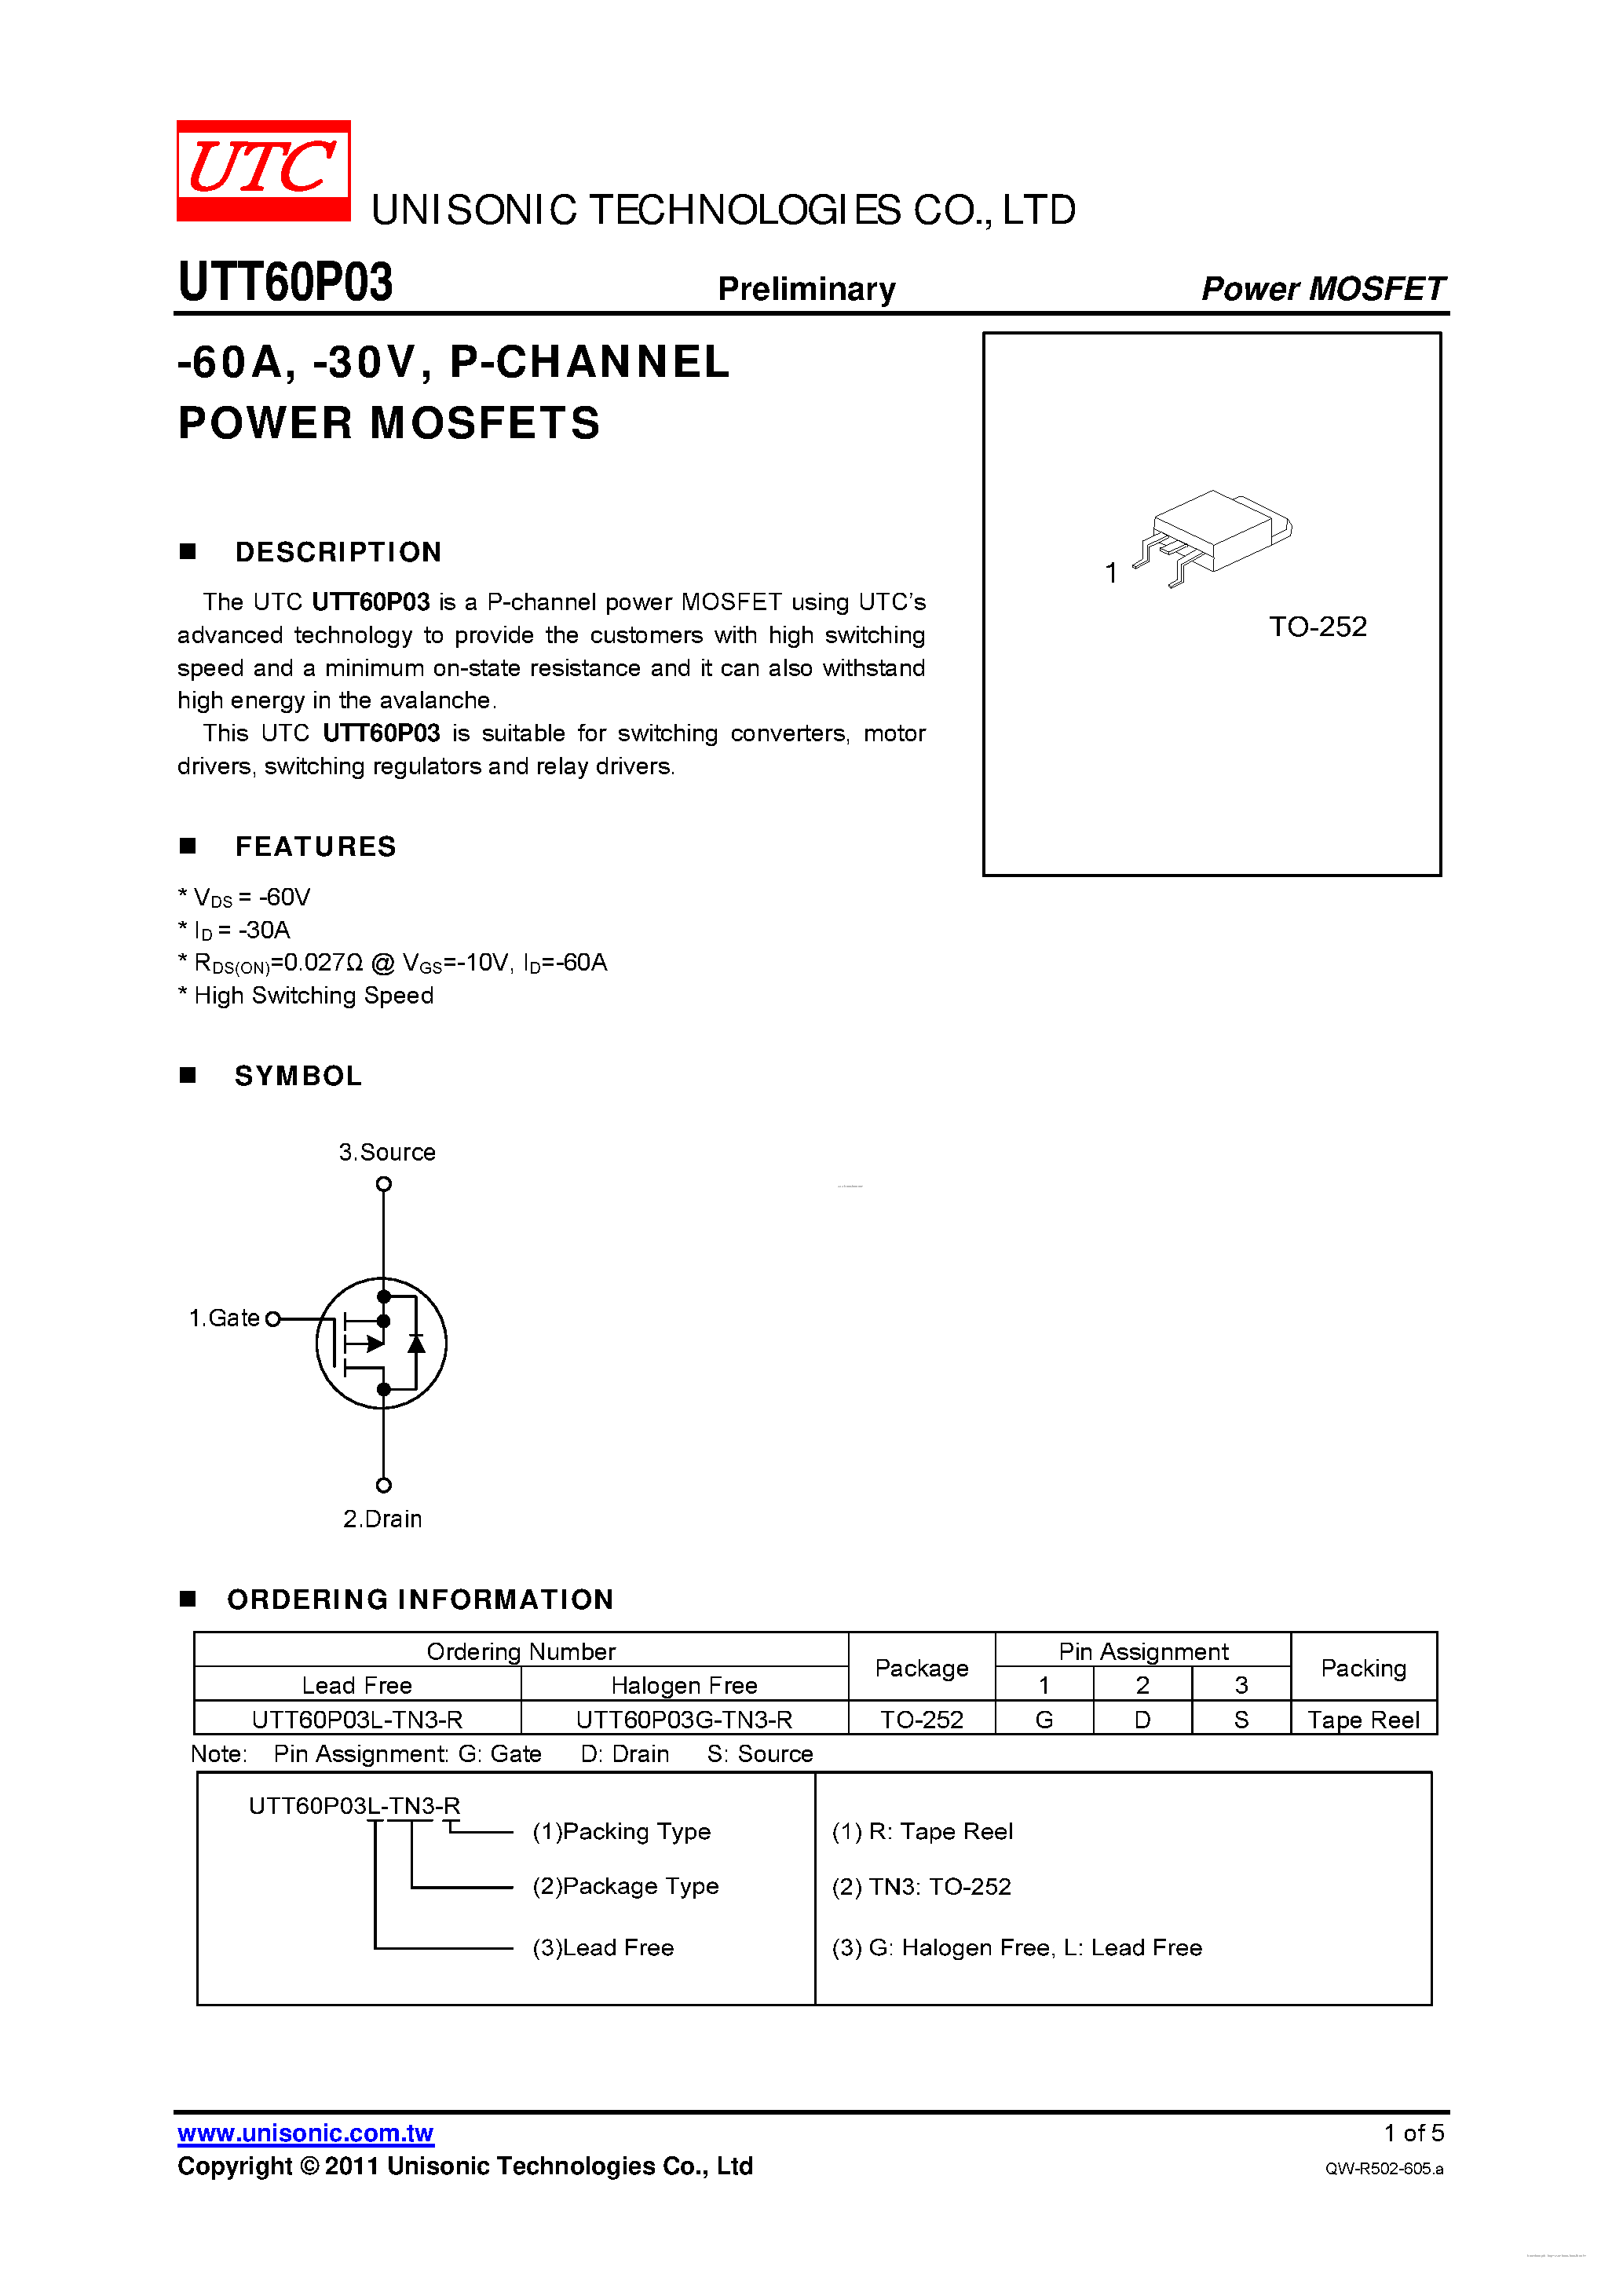 Datasheet UTT60P03 - P-CHANNEL POWER MOSFET page 1